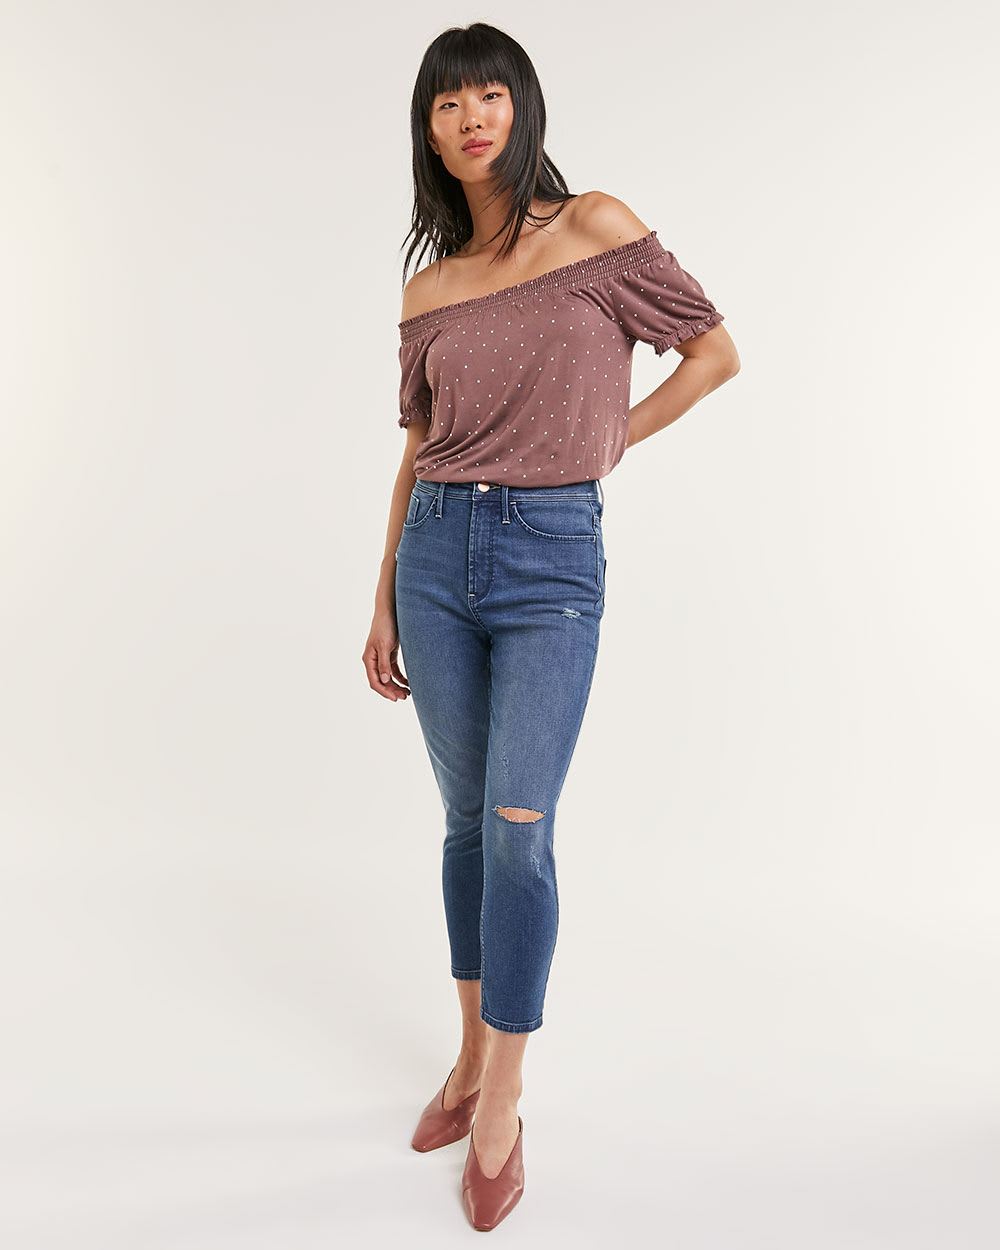 Super High Rise Cropped Skinny Jeans The Curvy